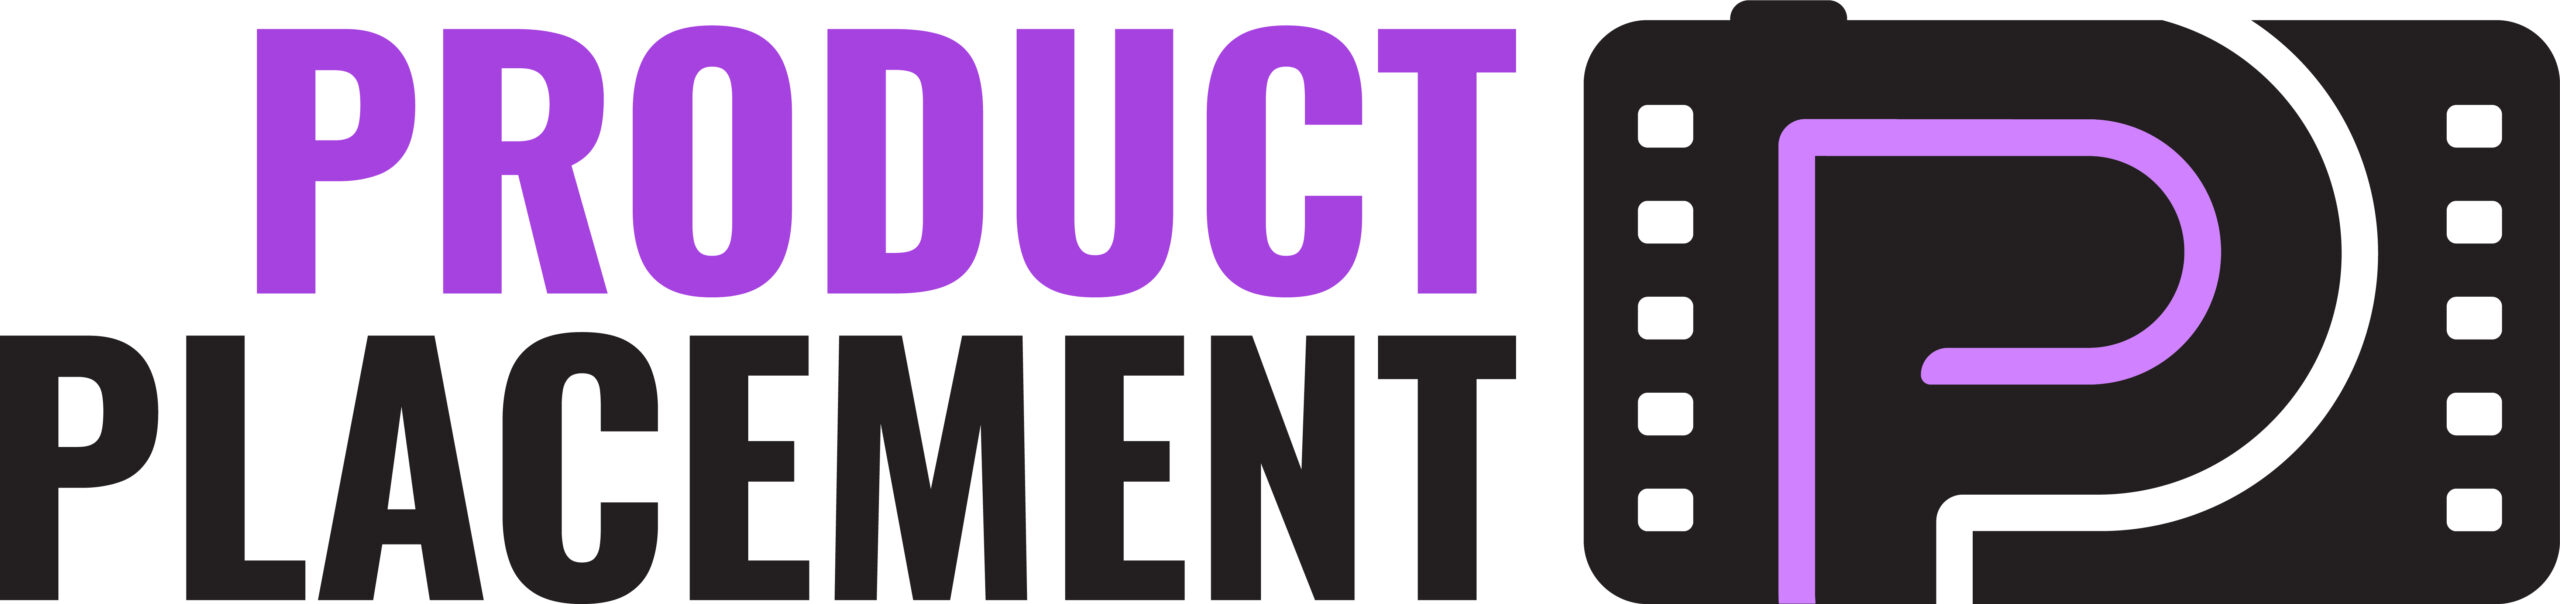 Product Placement Logo